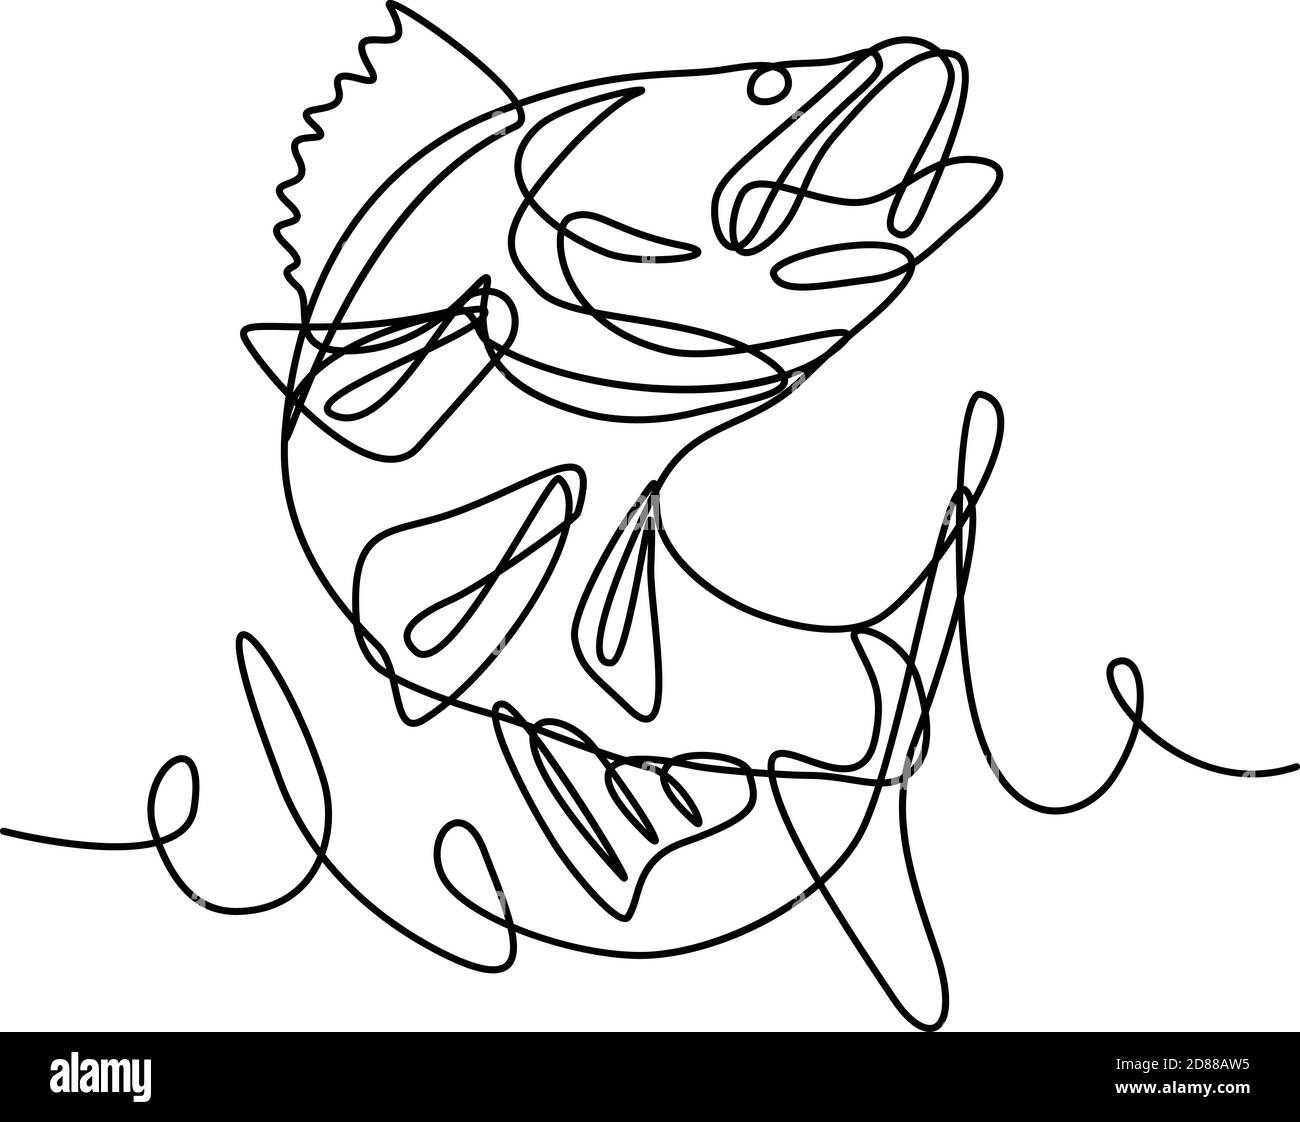 Continuous line drawing illustration of a walleye, yellow pike or